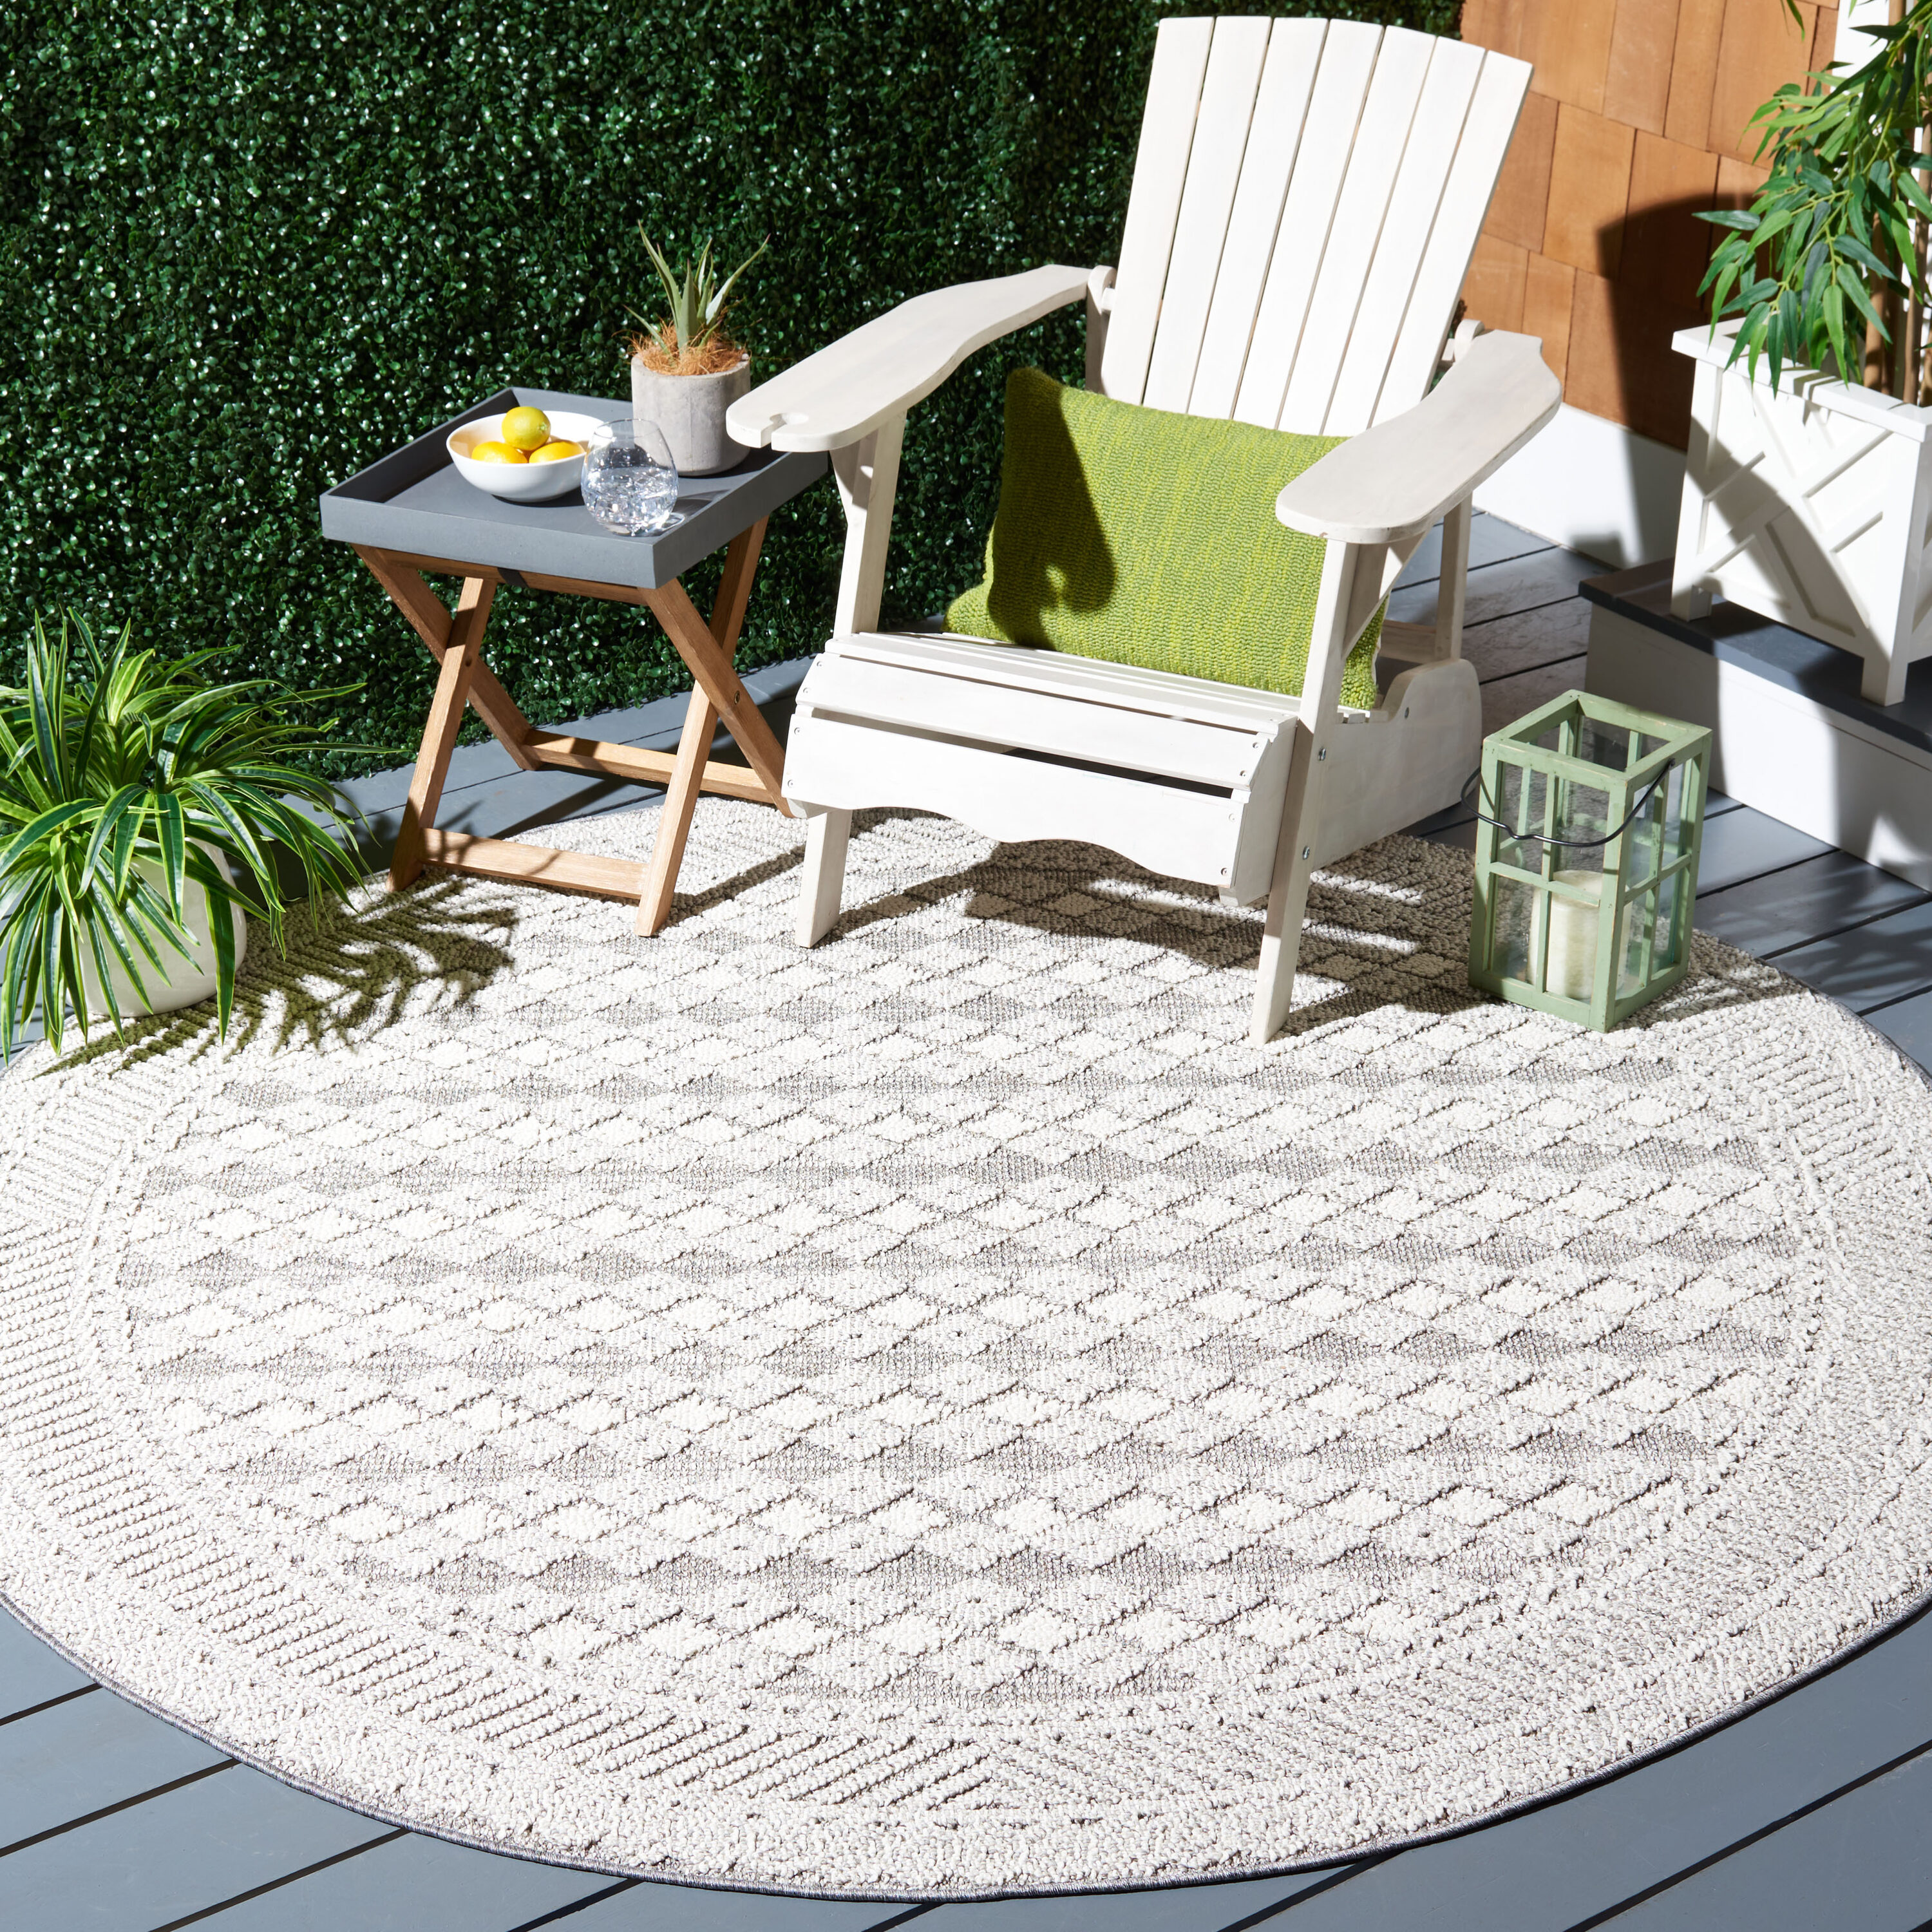  Round Large Jute Water Resistant Indoor Outdoor Rug 8 Foot -  Modern Outdoor Rugs for Patio, Entryway, Deck, Porch, Camping, RV - Outside  Area Rug : Patio, Lawn & Garden